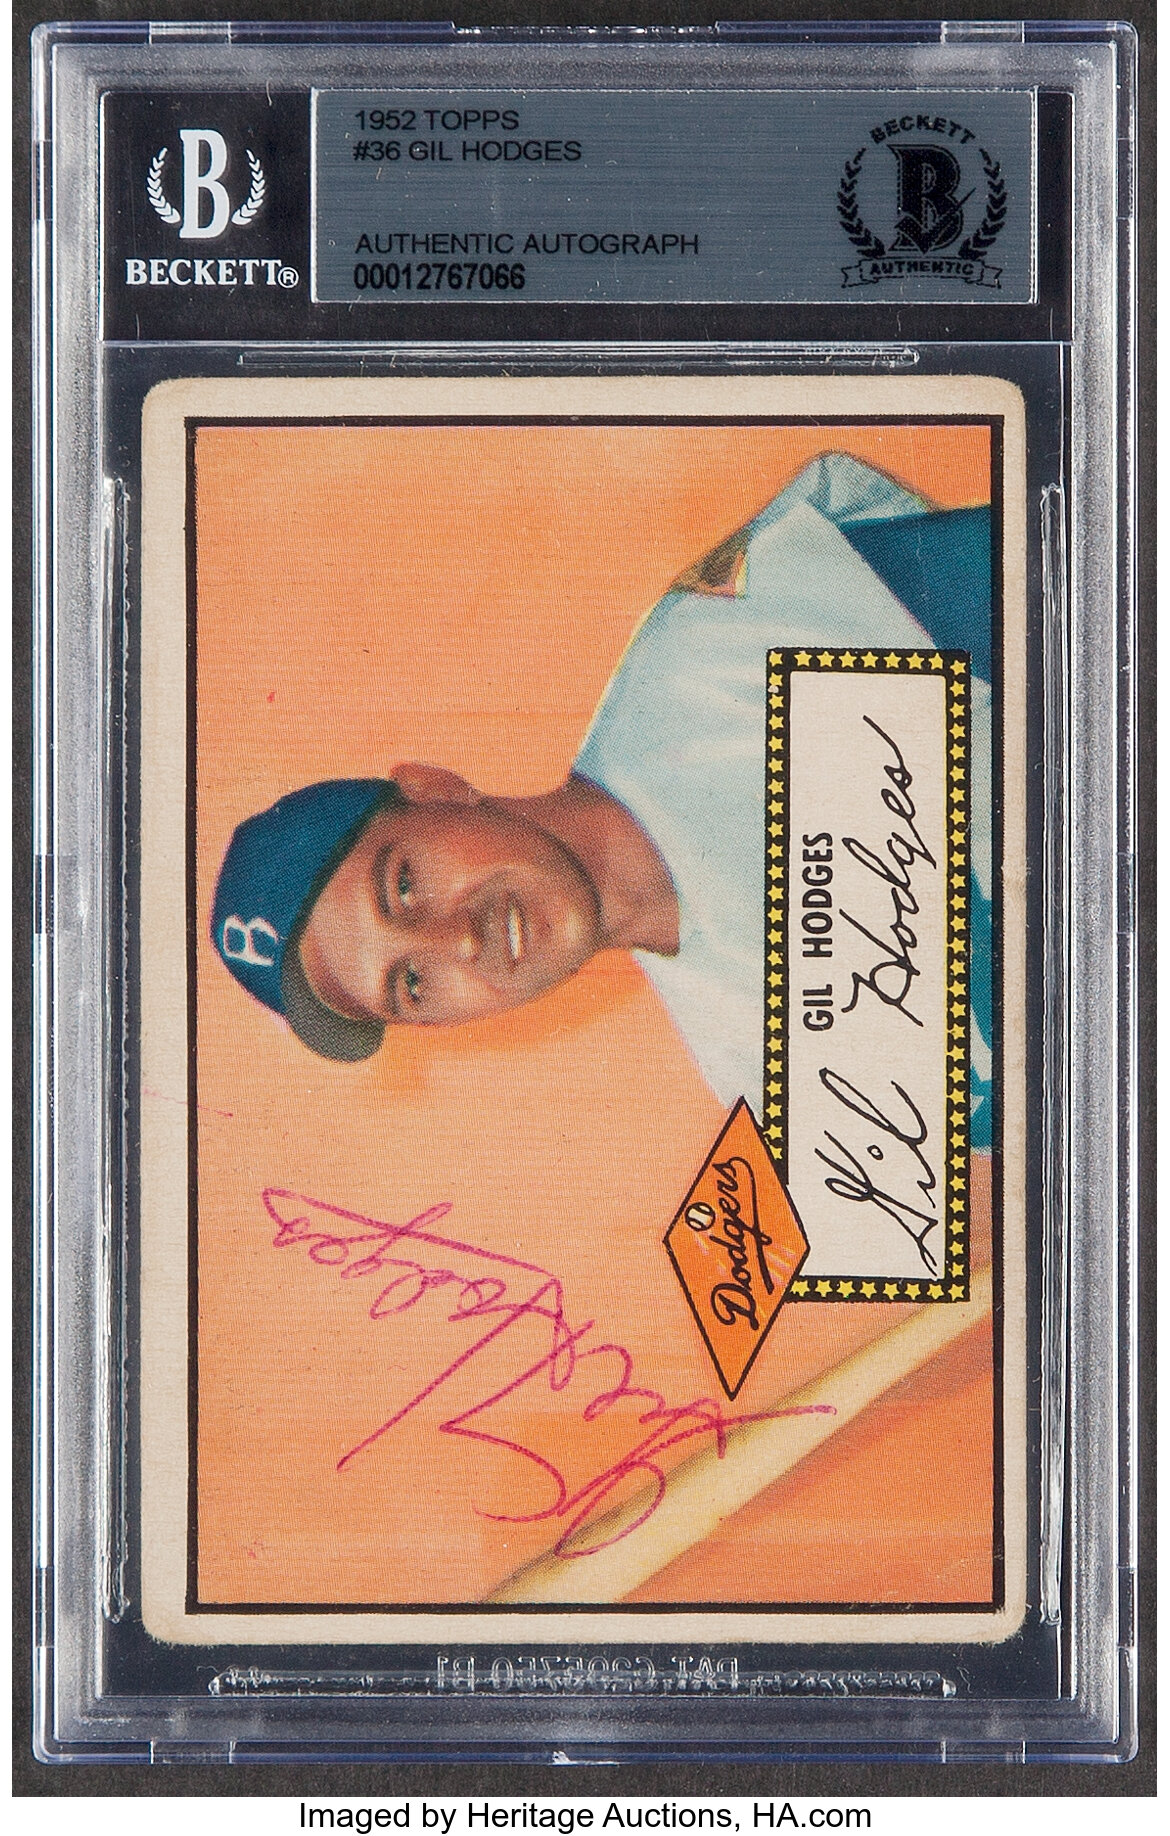 Sold at Auction: 1952 Bowman Gil Hodges Card